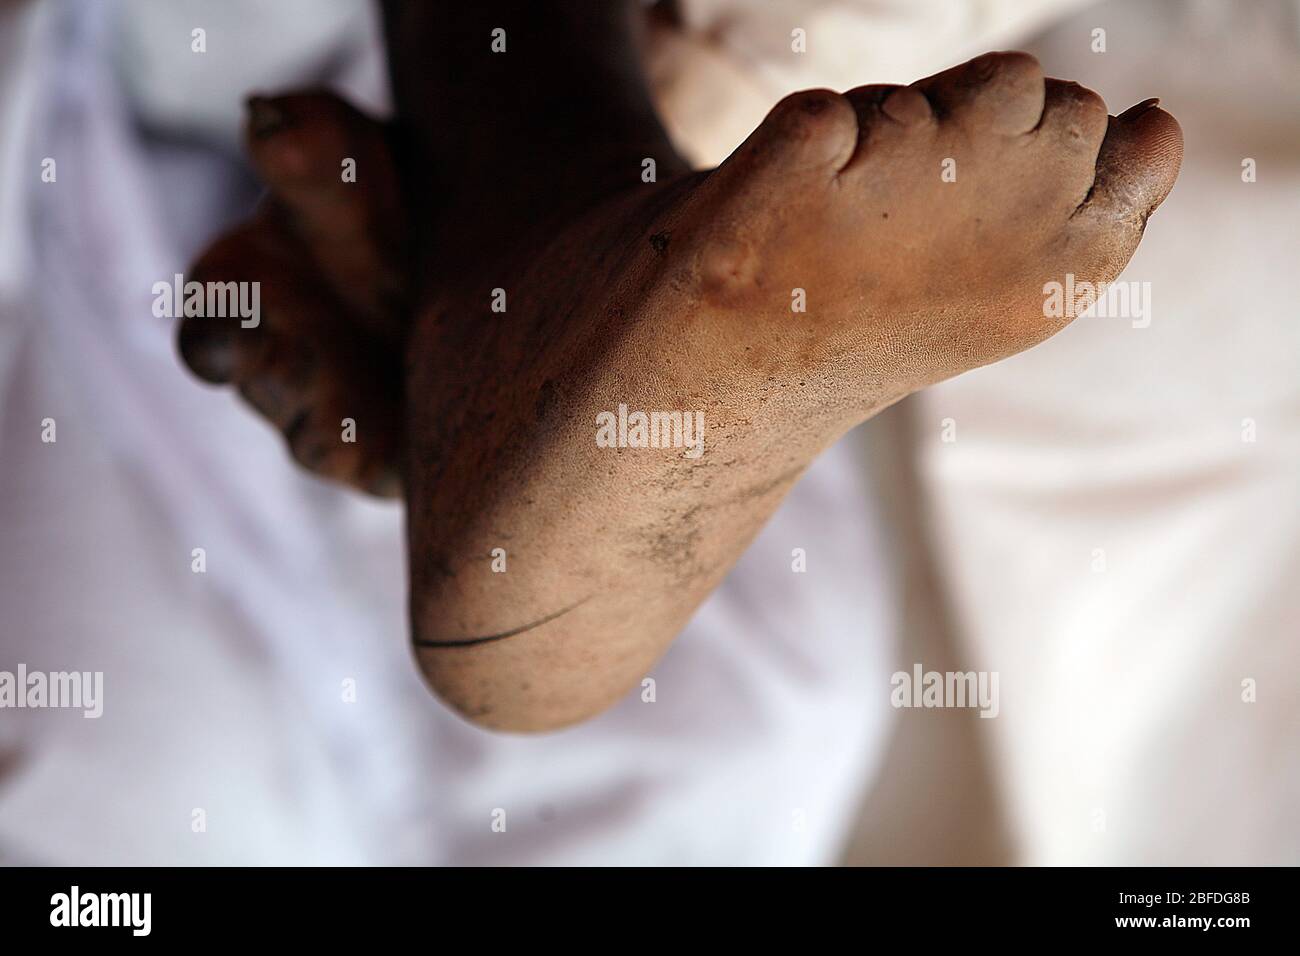 The feet of a young man suffering from leprosy. Leprosy is a chronic inflammatory disease caused by mycobacterium leprae. Leprosy damages the nerves, Stock Photo